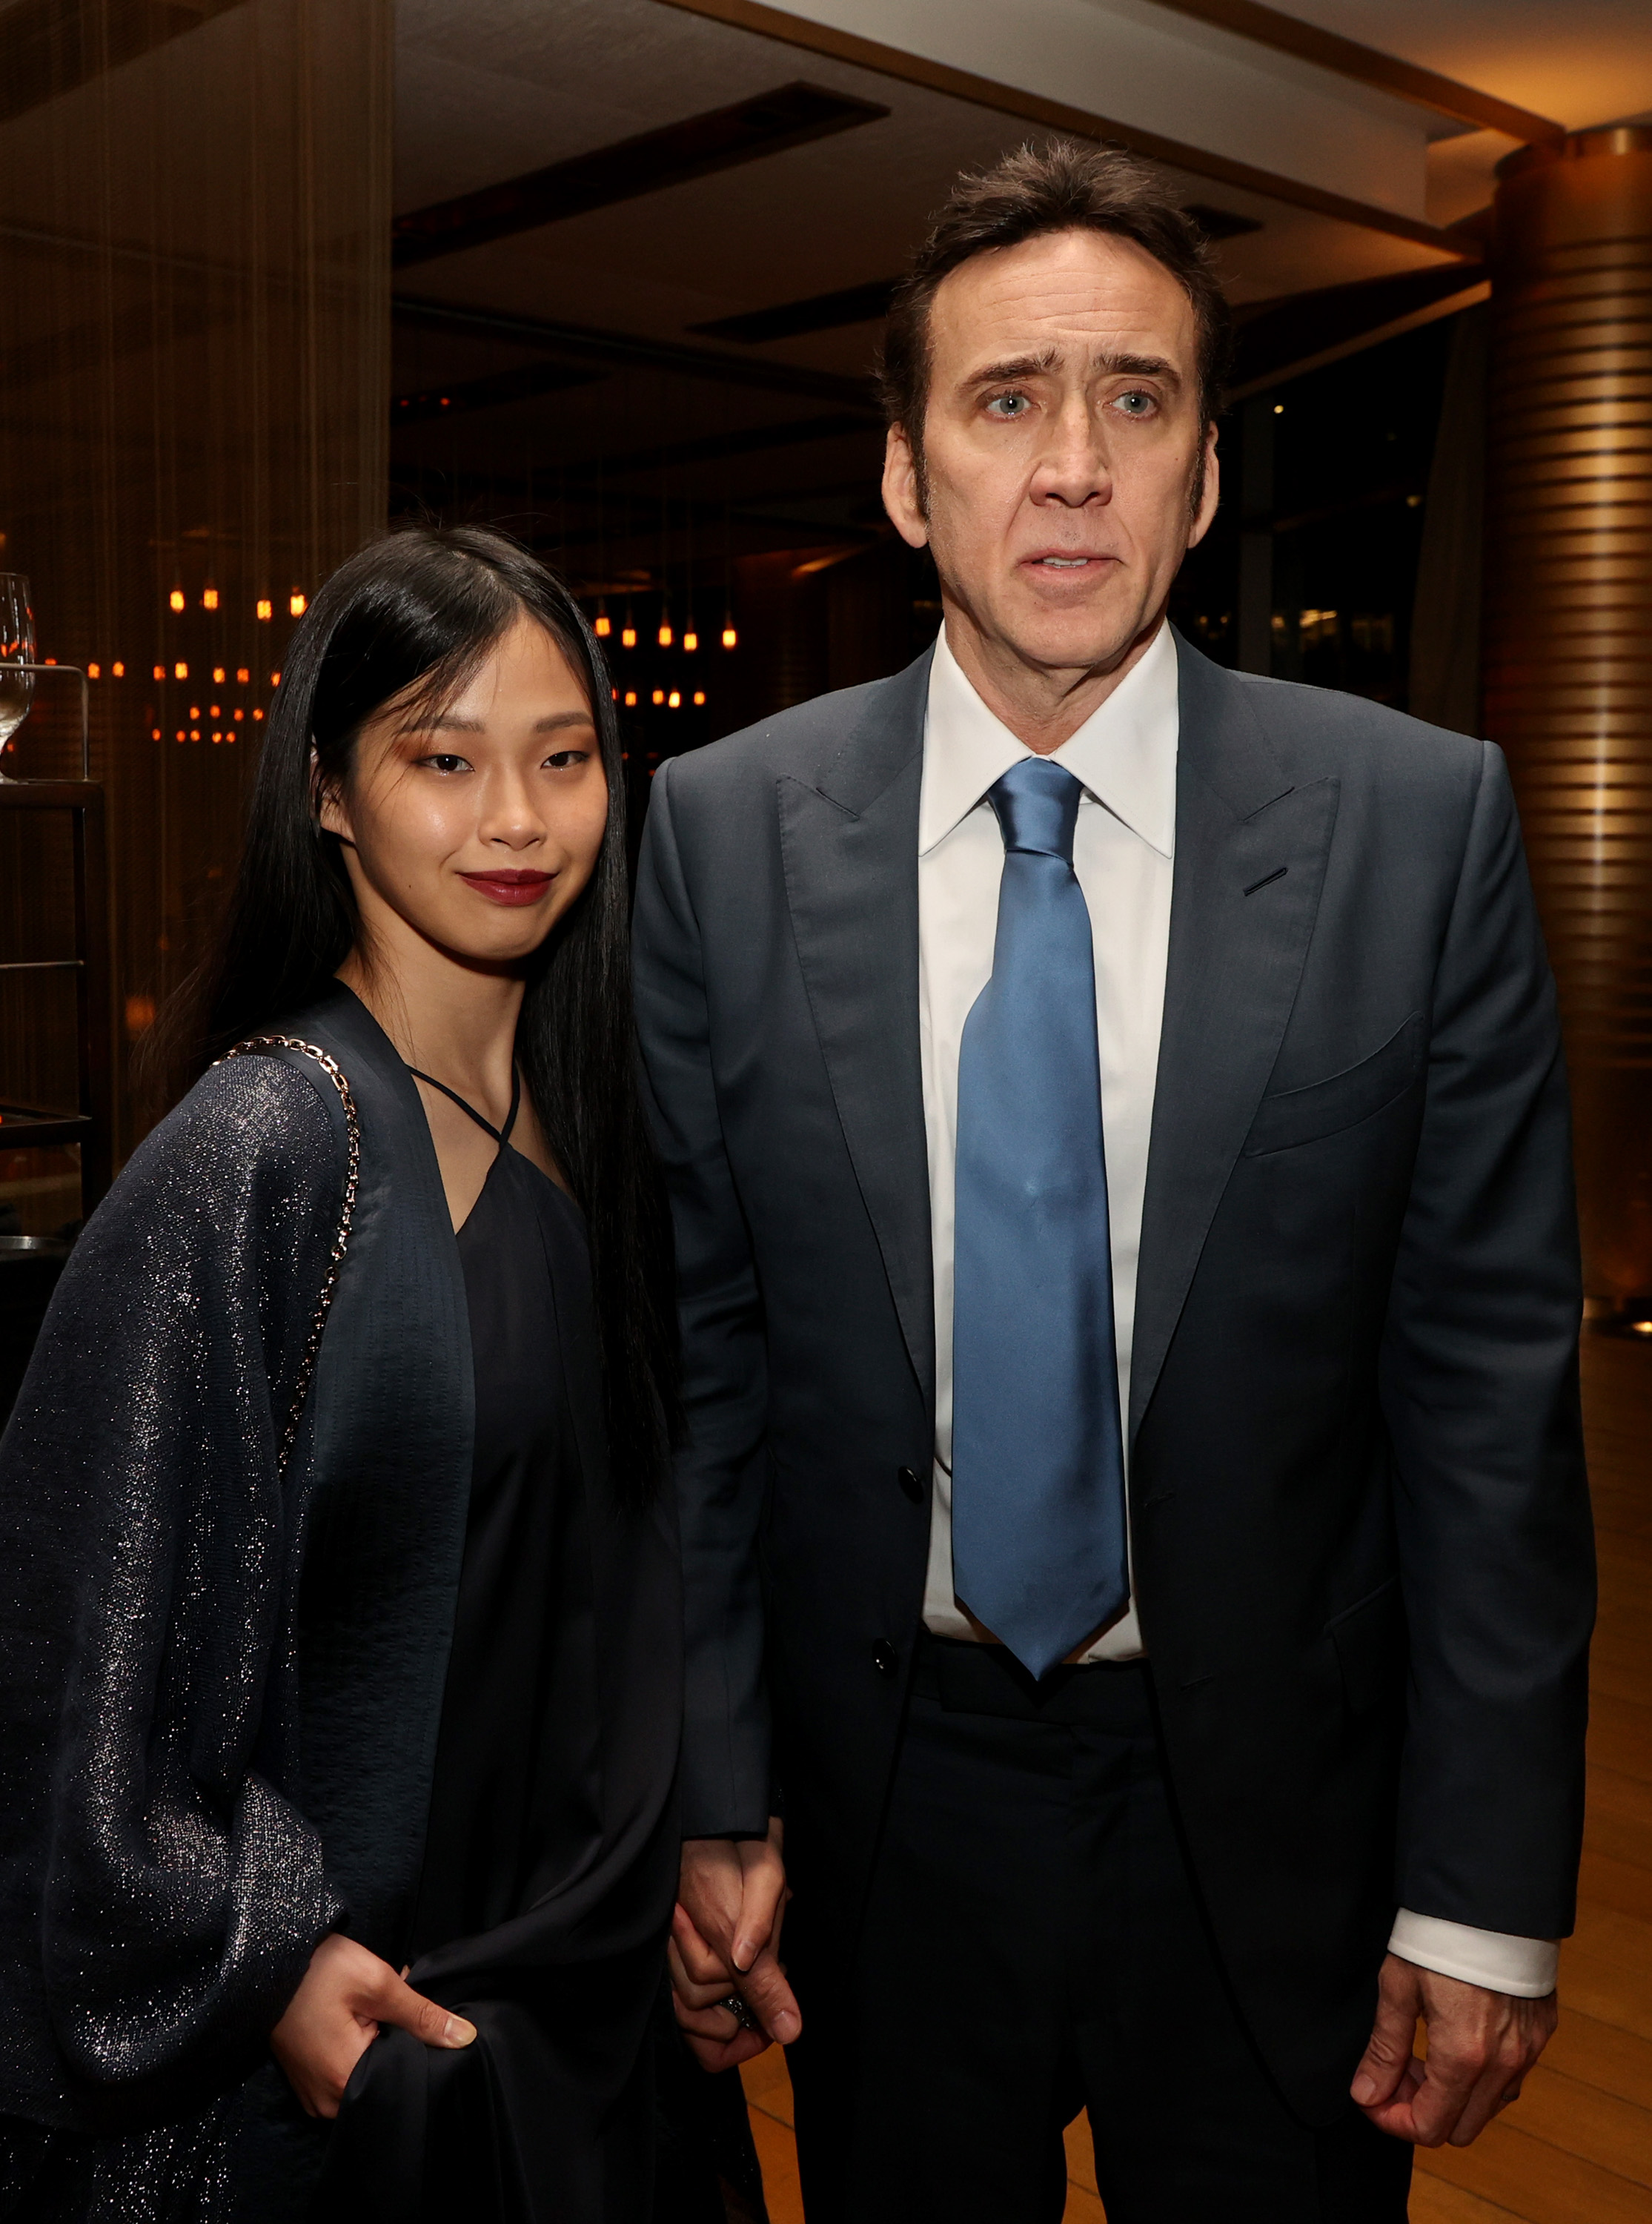 Riko Shibata and Nicolas Cage in West Los Angeles, California on July 13, 2021 | Source: Getty Images